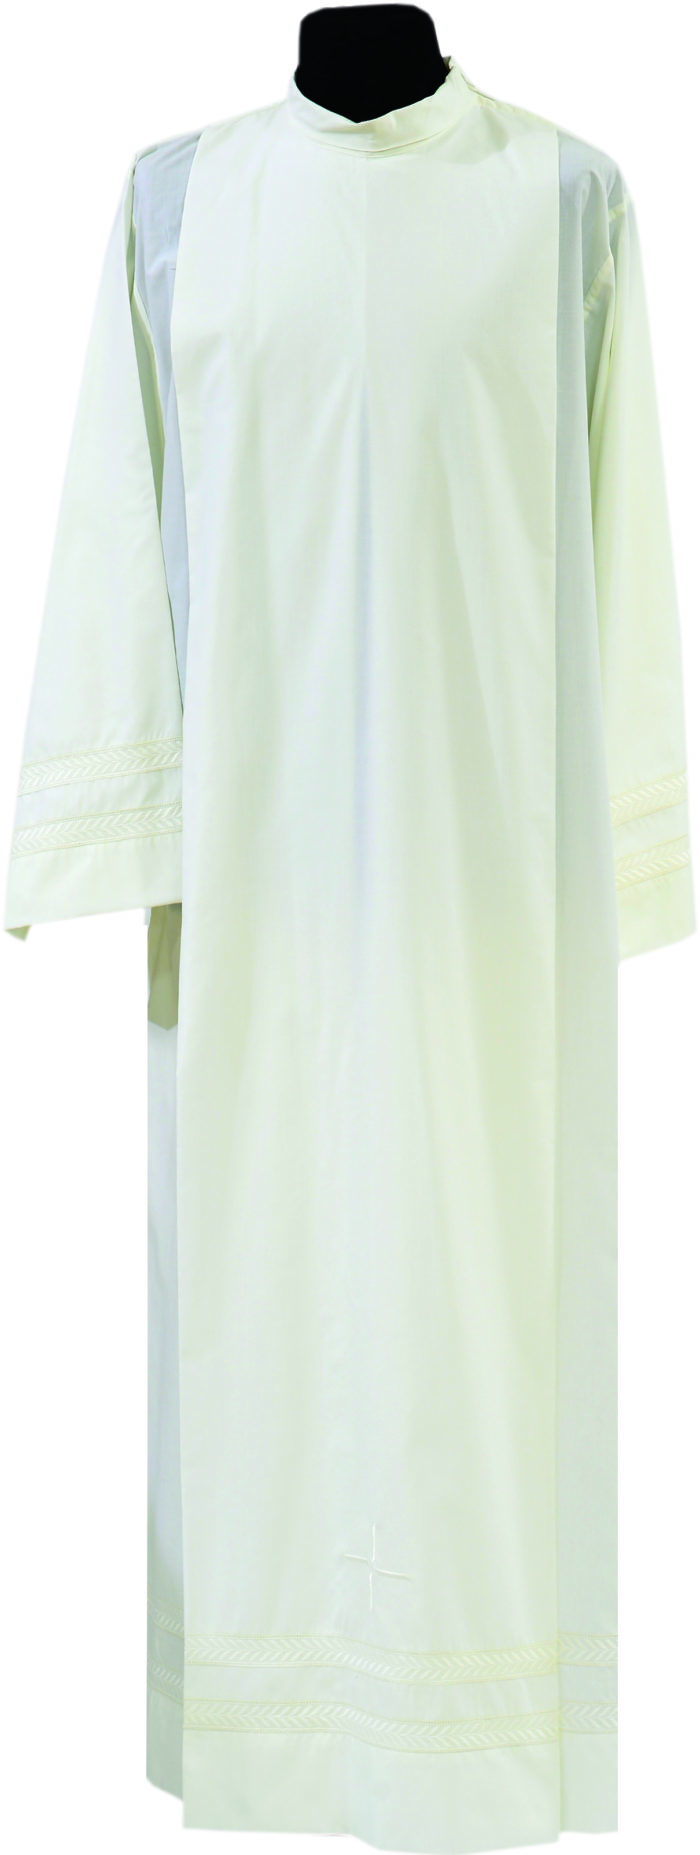 Maranatha Lab "Corner" gown in cotton blend fabric decorated with two rows of embroidery and cruciform symbol.